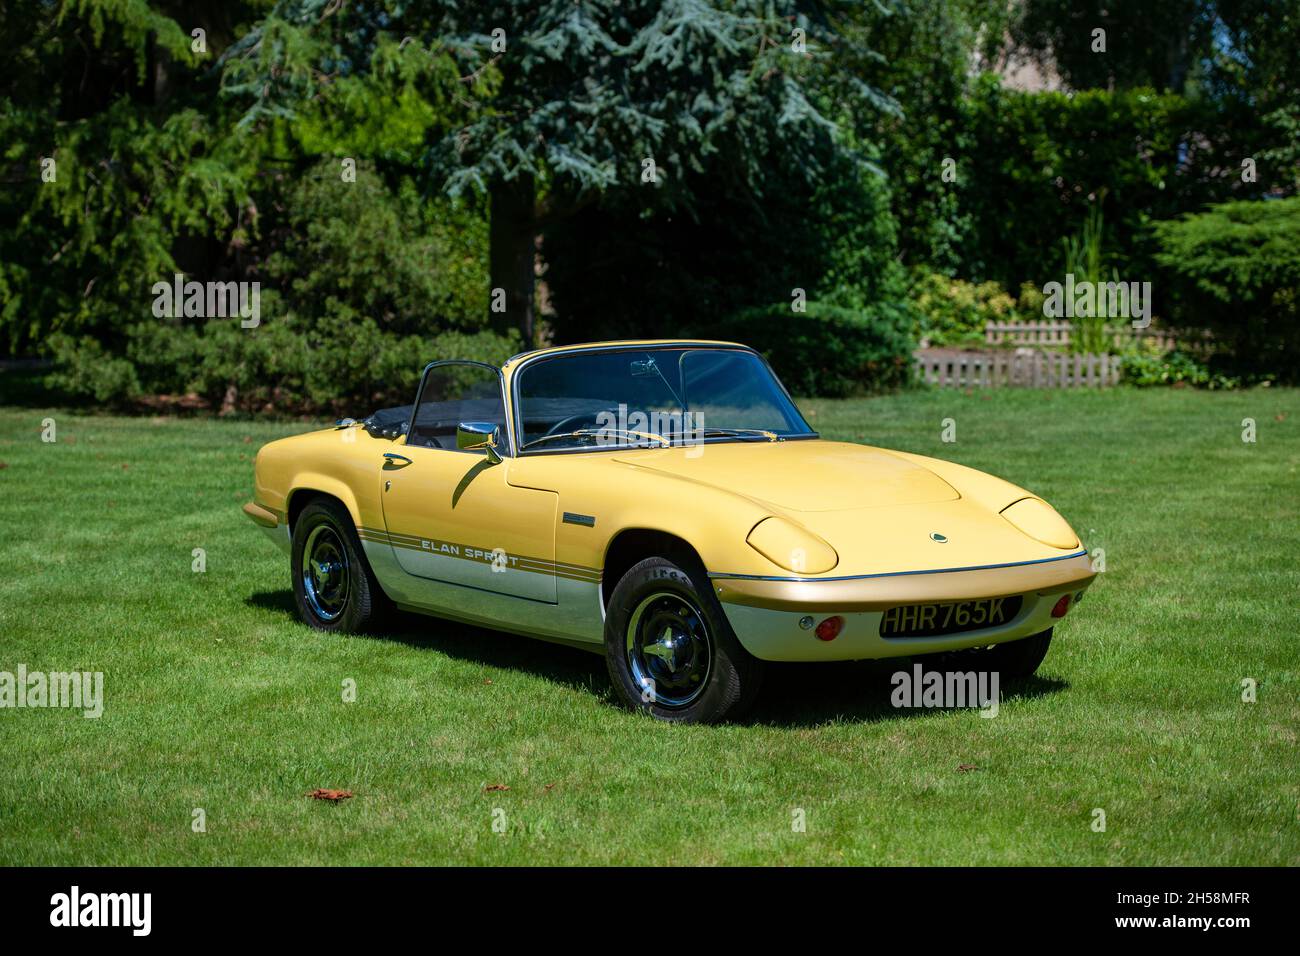 Yellow Lotus Elan Sprint convertible parked on a lawn with trees and garden behind on a sunny Summer day Stock Photo